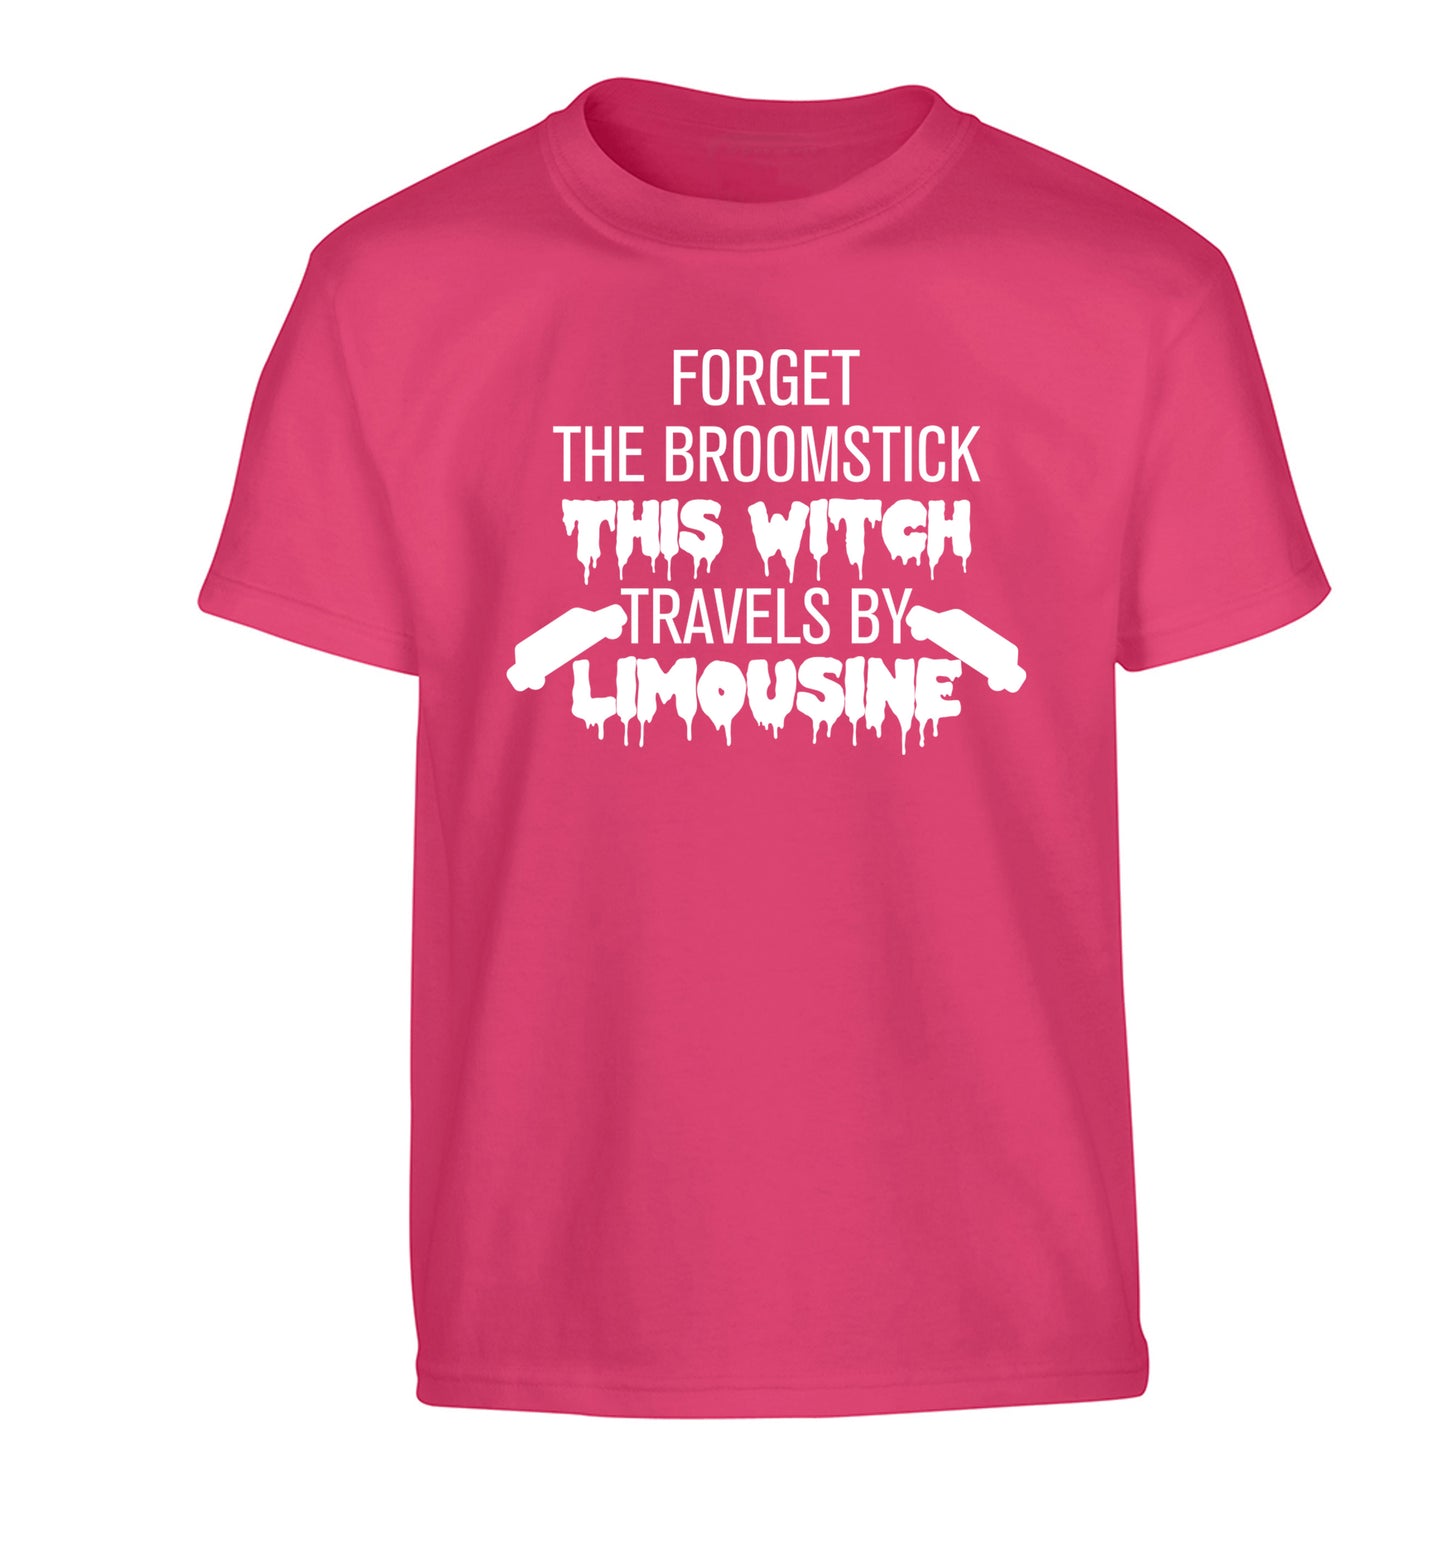 Forget the broomstick this witch travels by limousine Children's pink Tshirt 12-14 Years